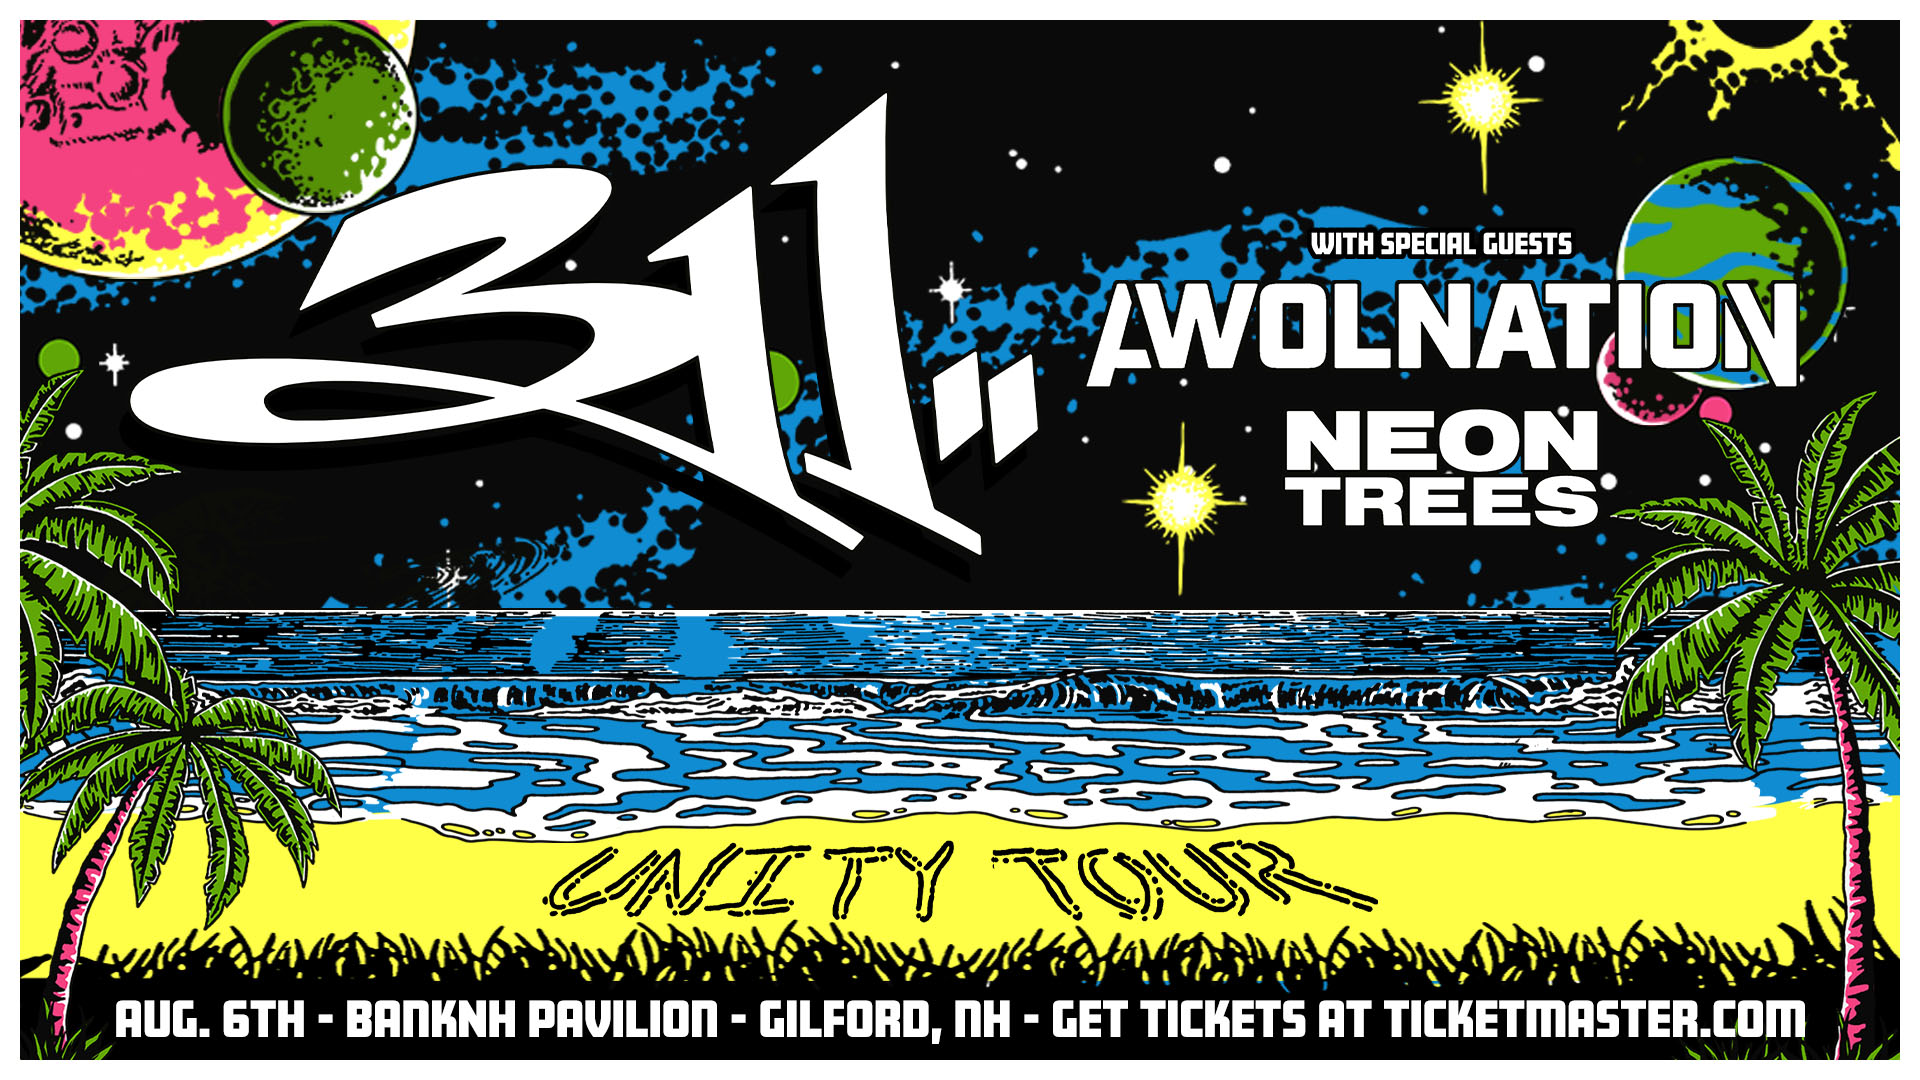 Win Tickets To 311 at the BankNH Pavilion!